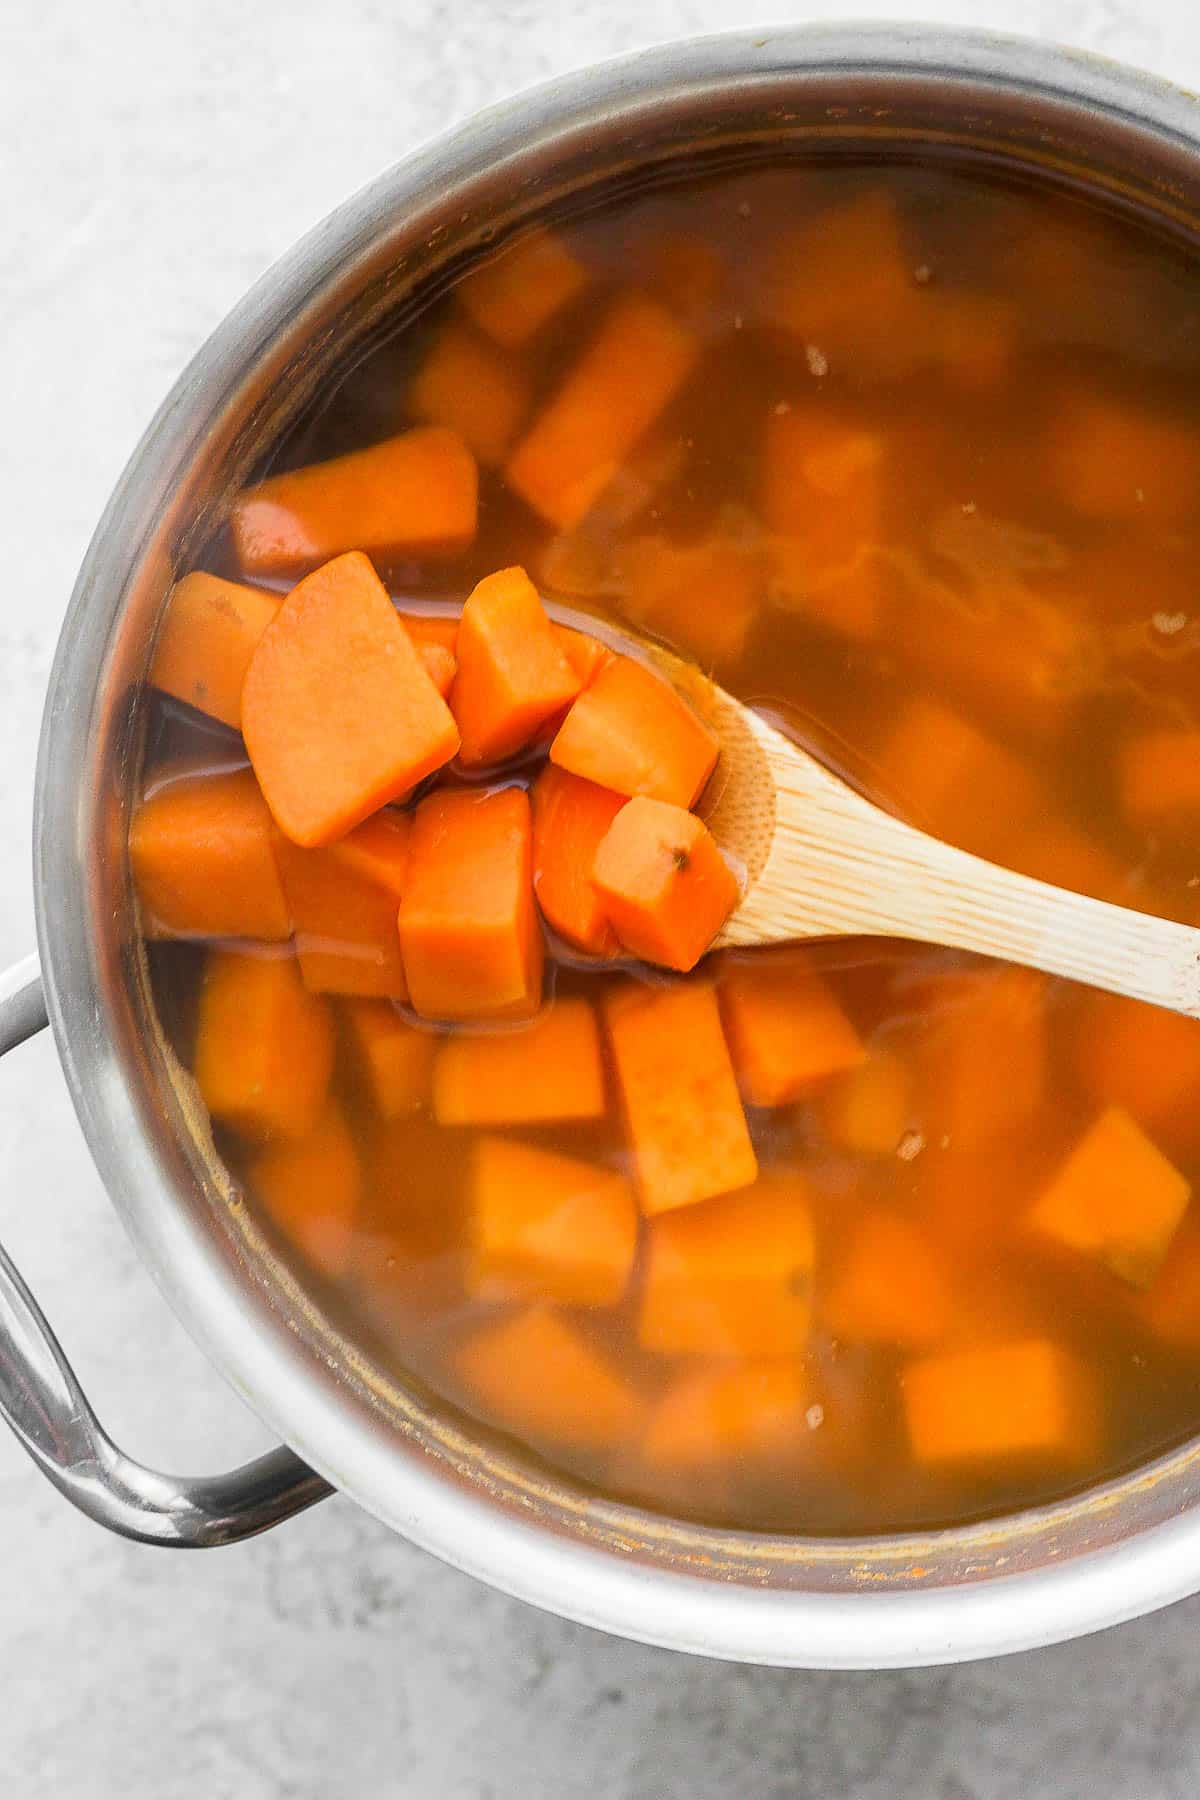 Cubed and peeled sweet potatoes boiled in a large pot.  A wooden spoon lifts a few out to show that they've been cooked.